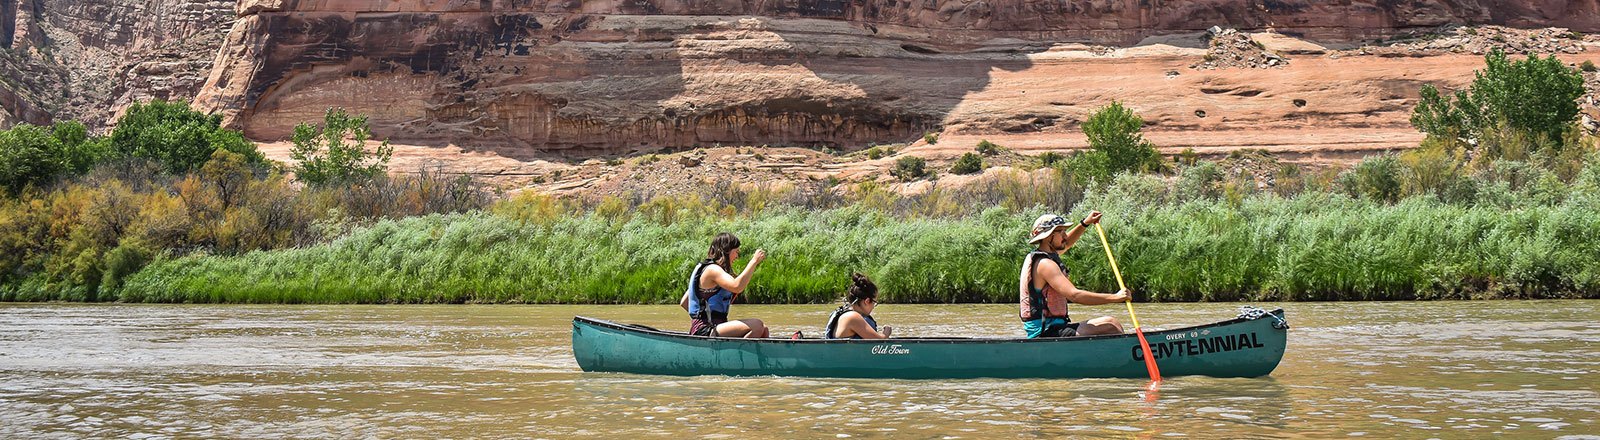 Geography students in canoe at the Colorado River